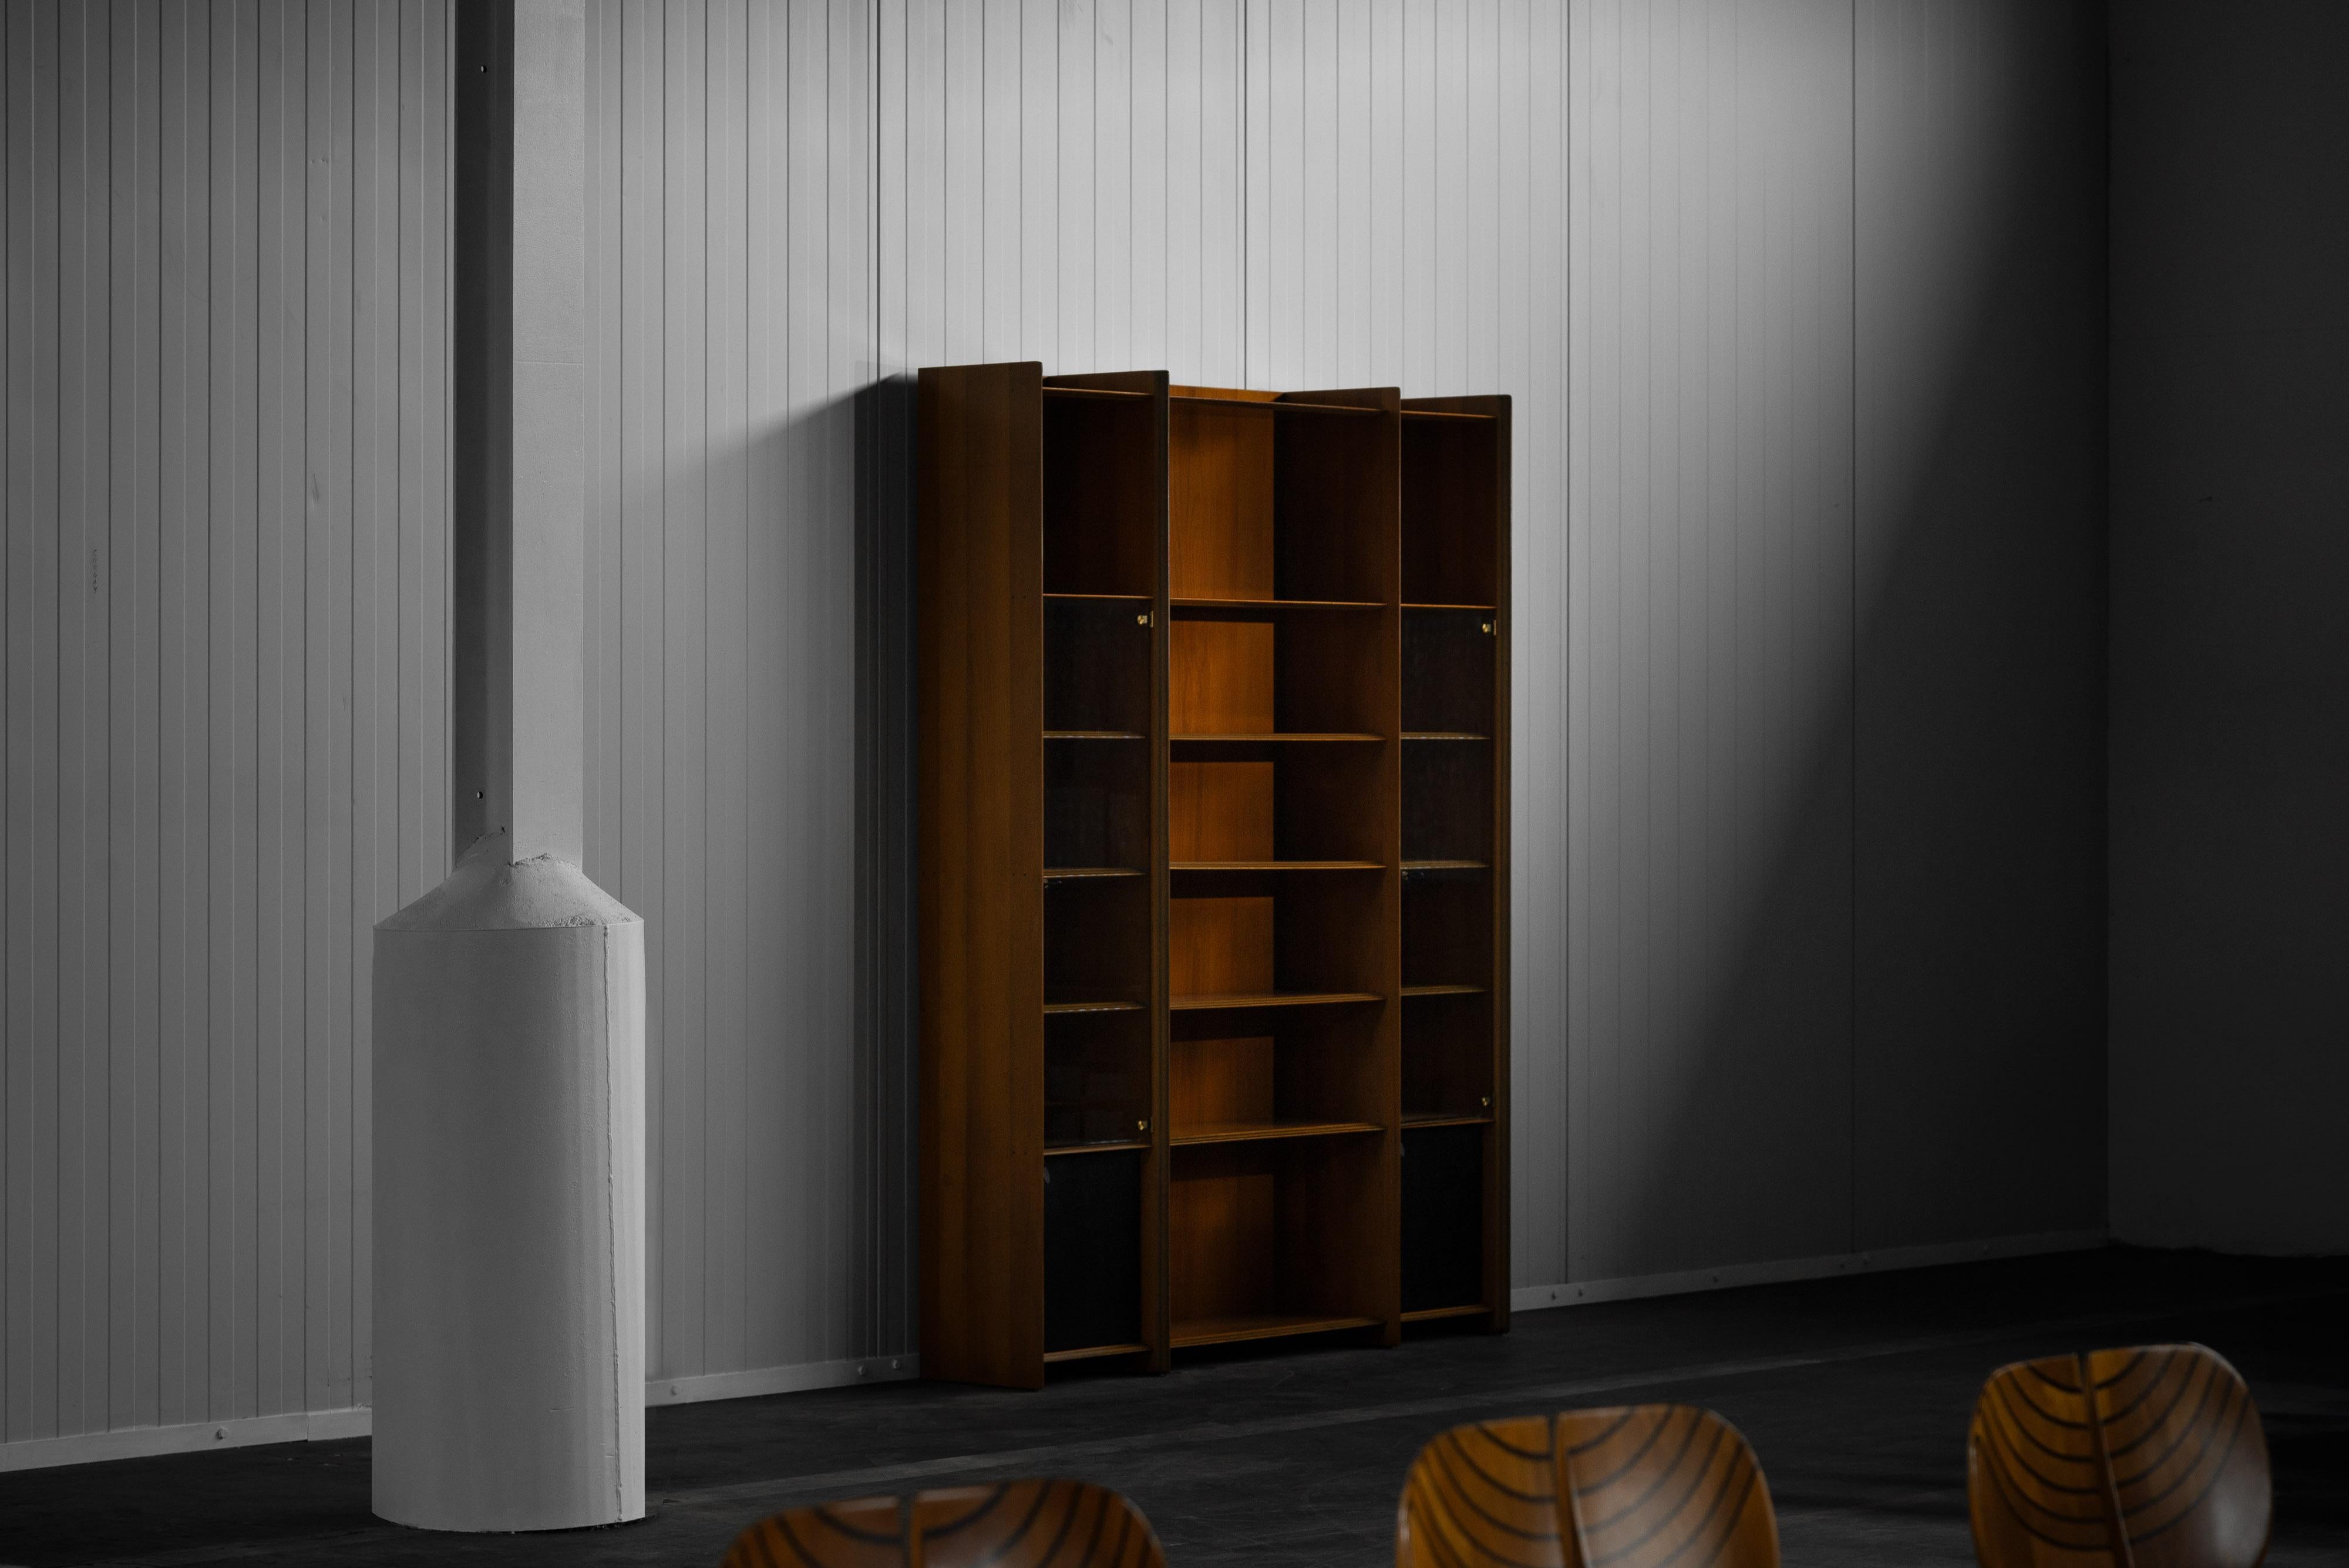 Large Artona bookcase designed by Afra & Tobia Scarpa and manufactured by Maxalto in 1975 in Italy. This bookcase is as elegant as it is practical. It's made from walnut veneer with ebony wood inlays, giving it a timeless and sophisticated look. It